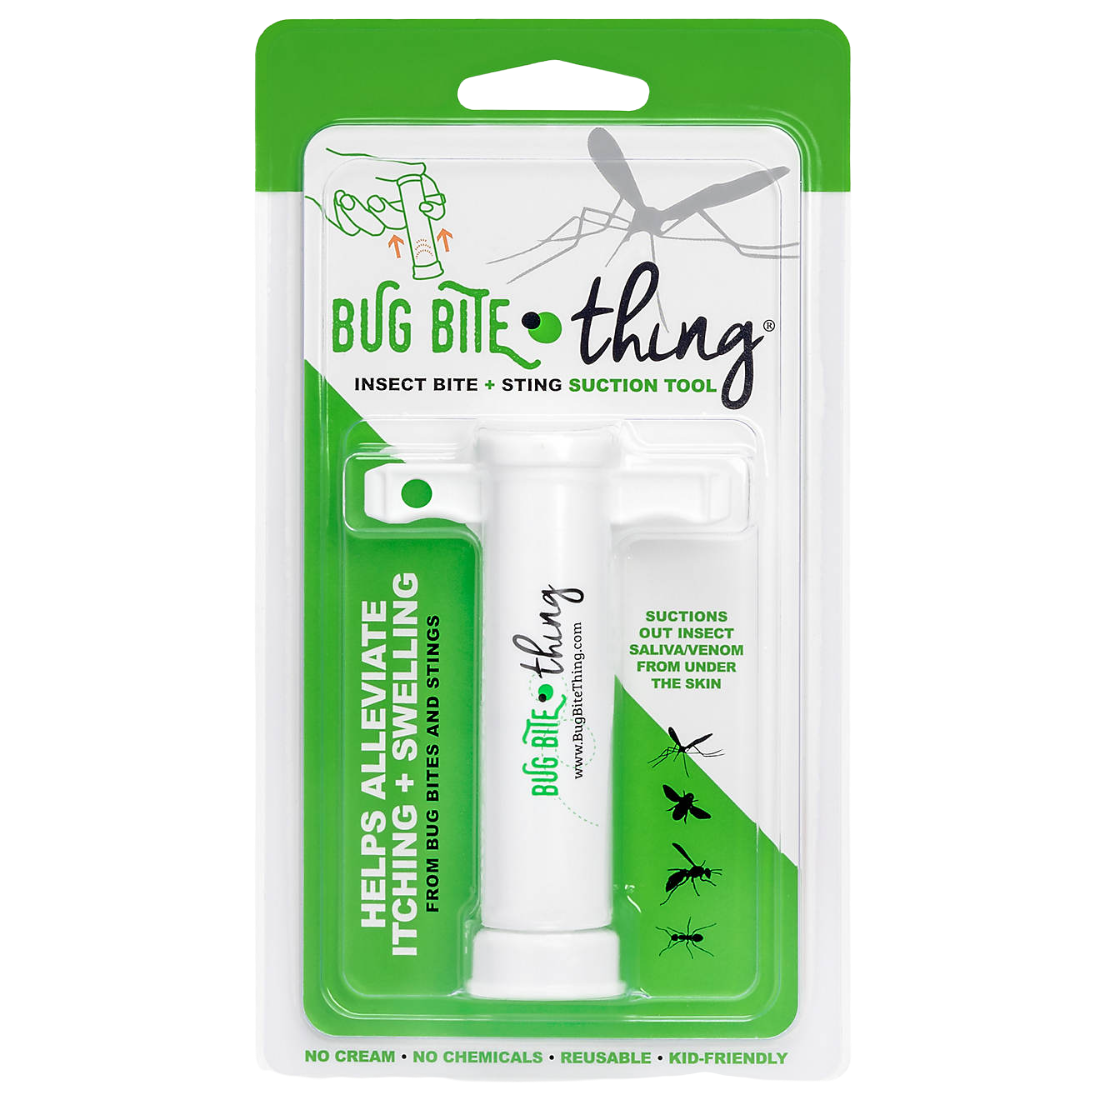 YES! Our Bug Bite Thing, Suction Tool 🦟 is SAFE to use on anyone! It